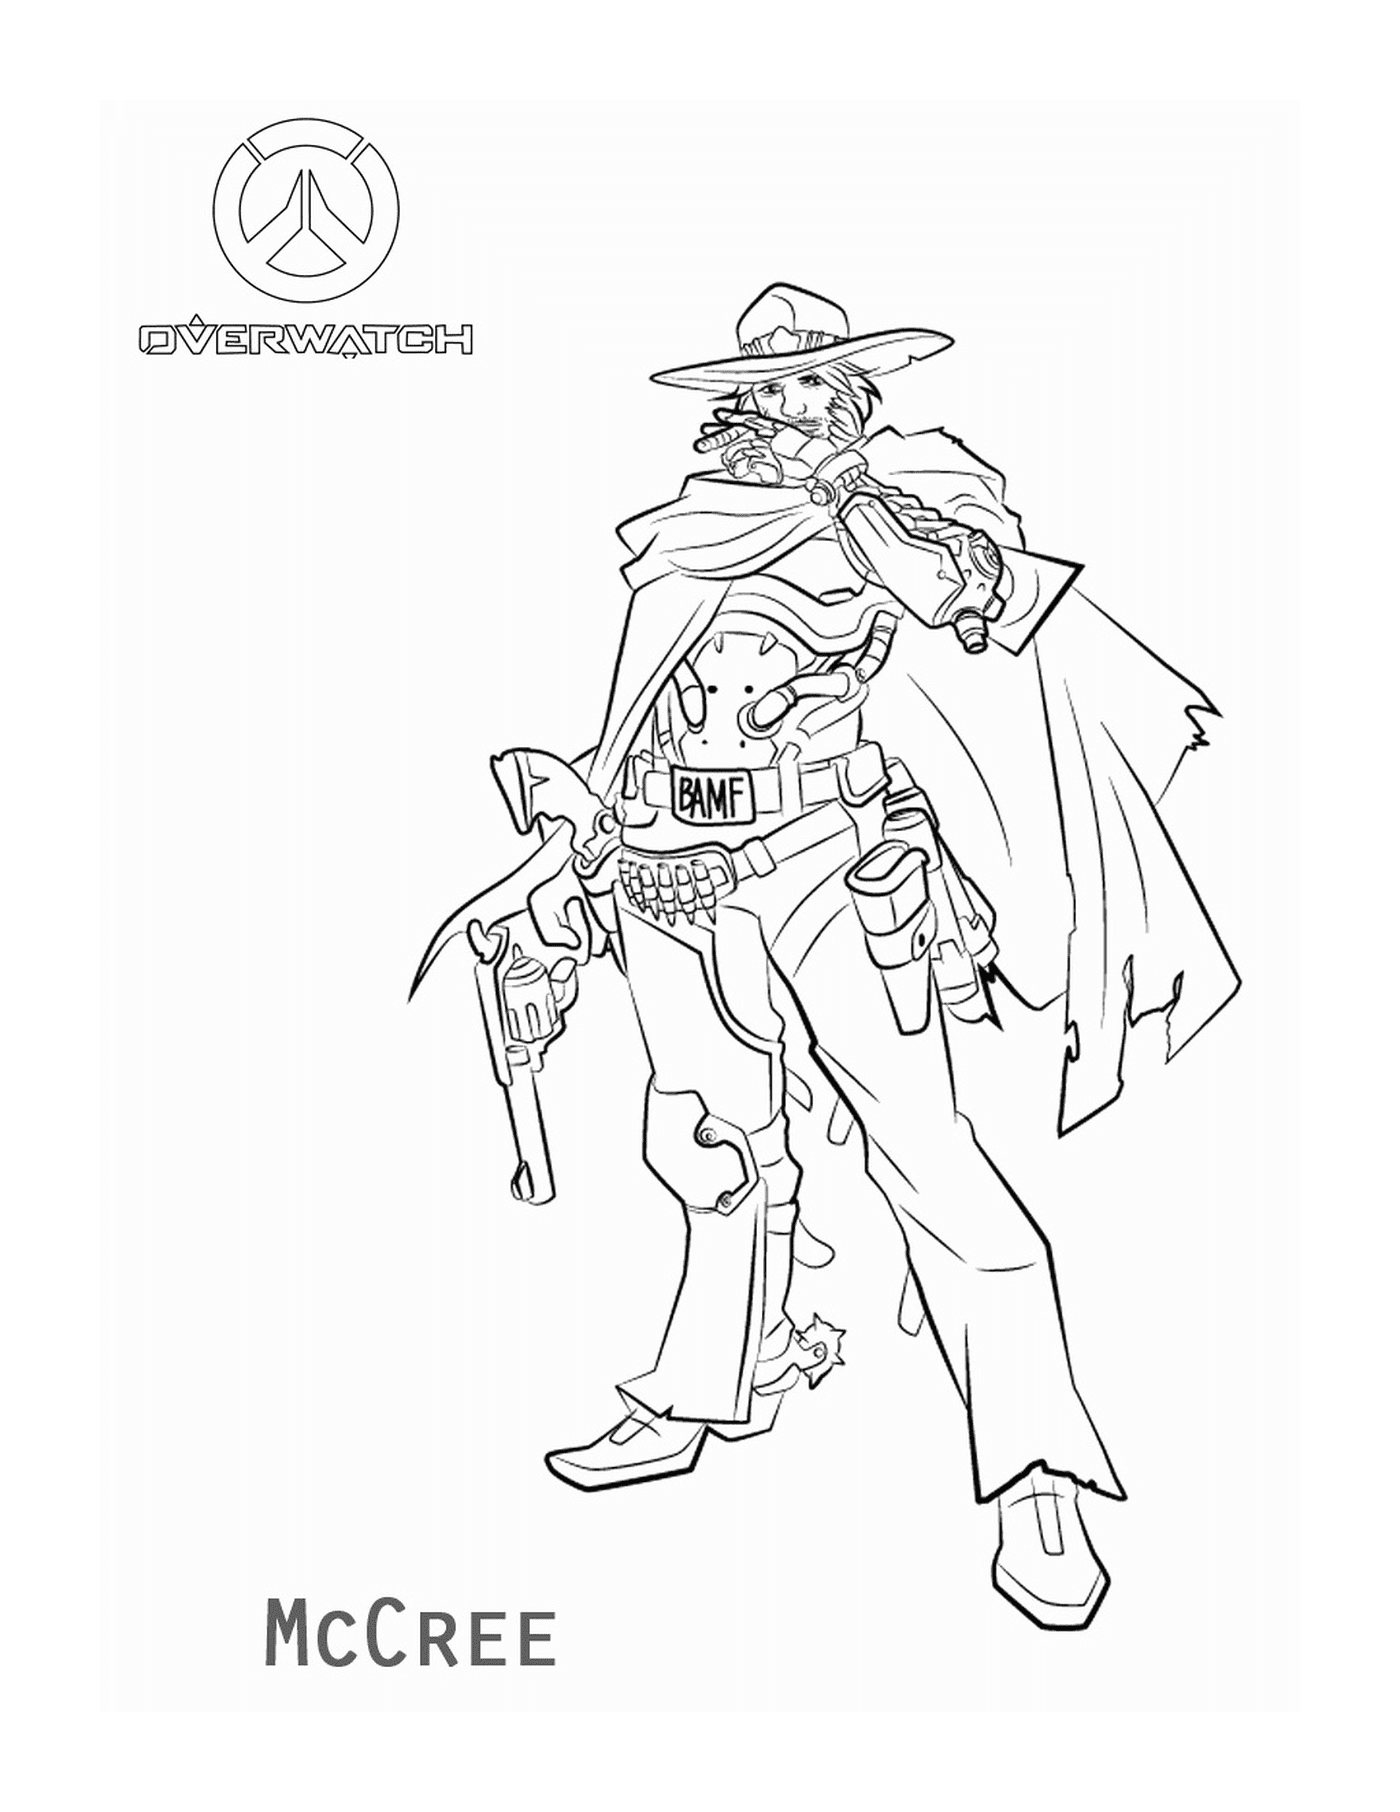  McCree from Overwatch 